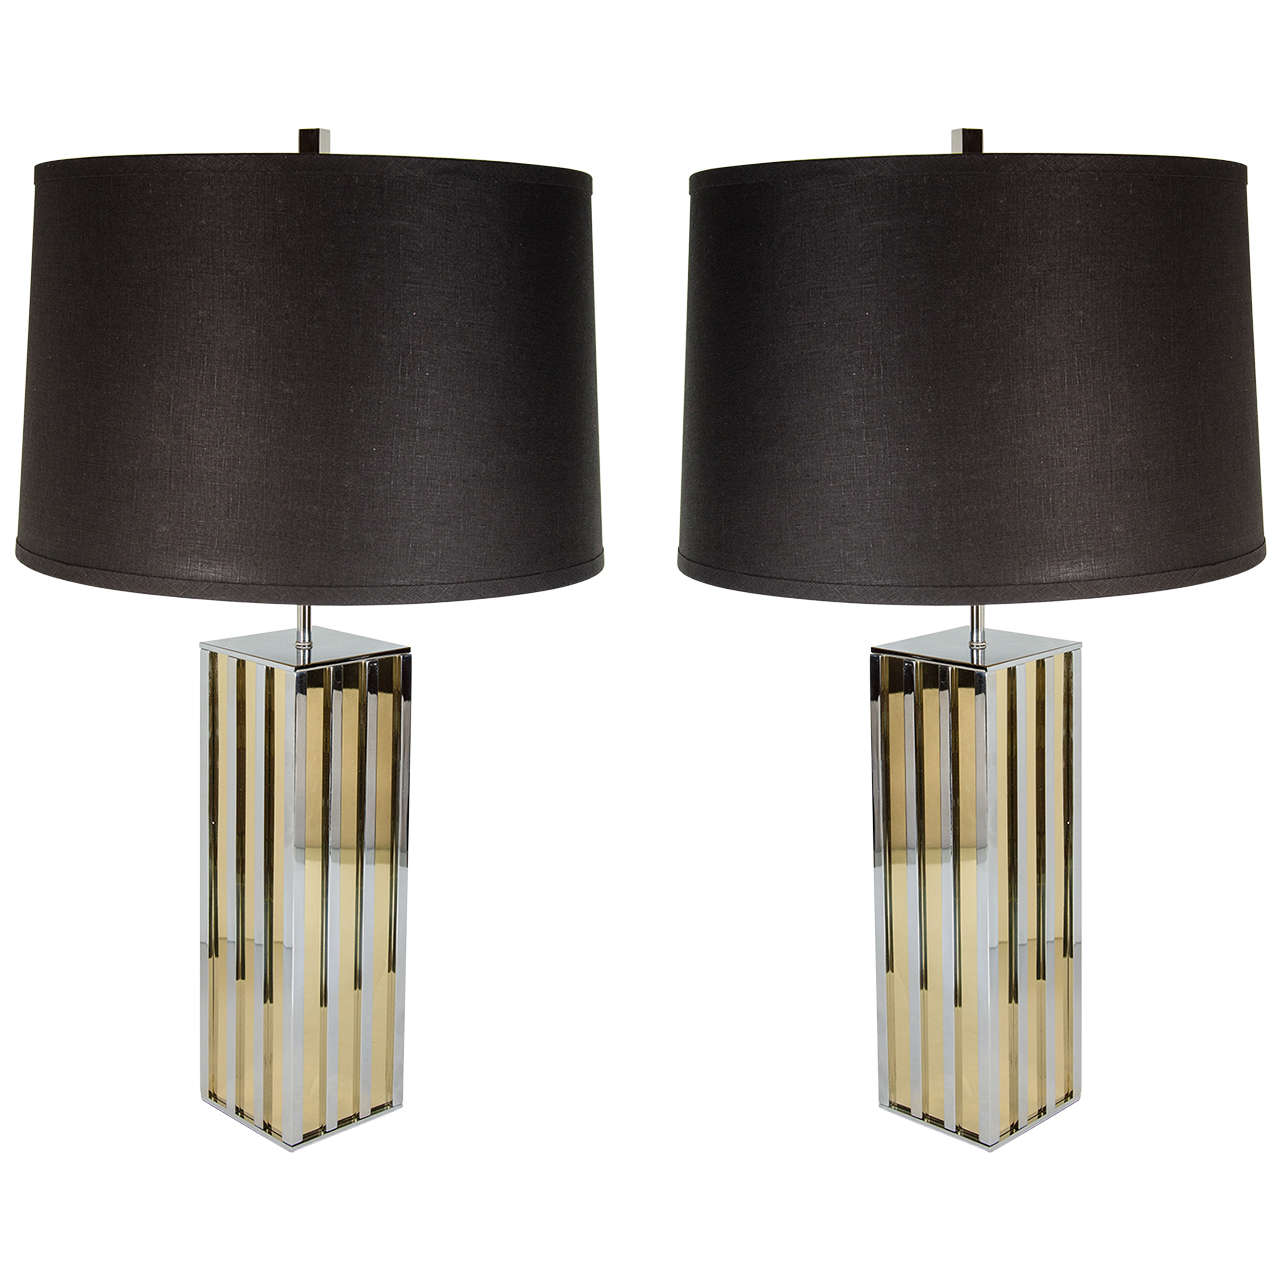 Ultra Chic Pair of Mid-Century Modern Table Lamps in the Manner of Paul Evans